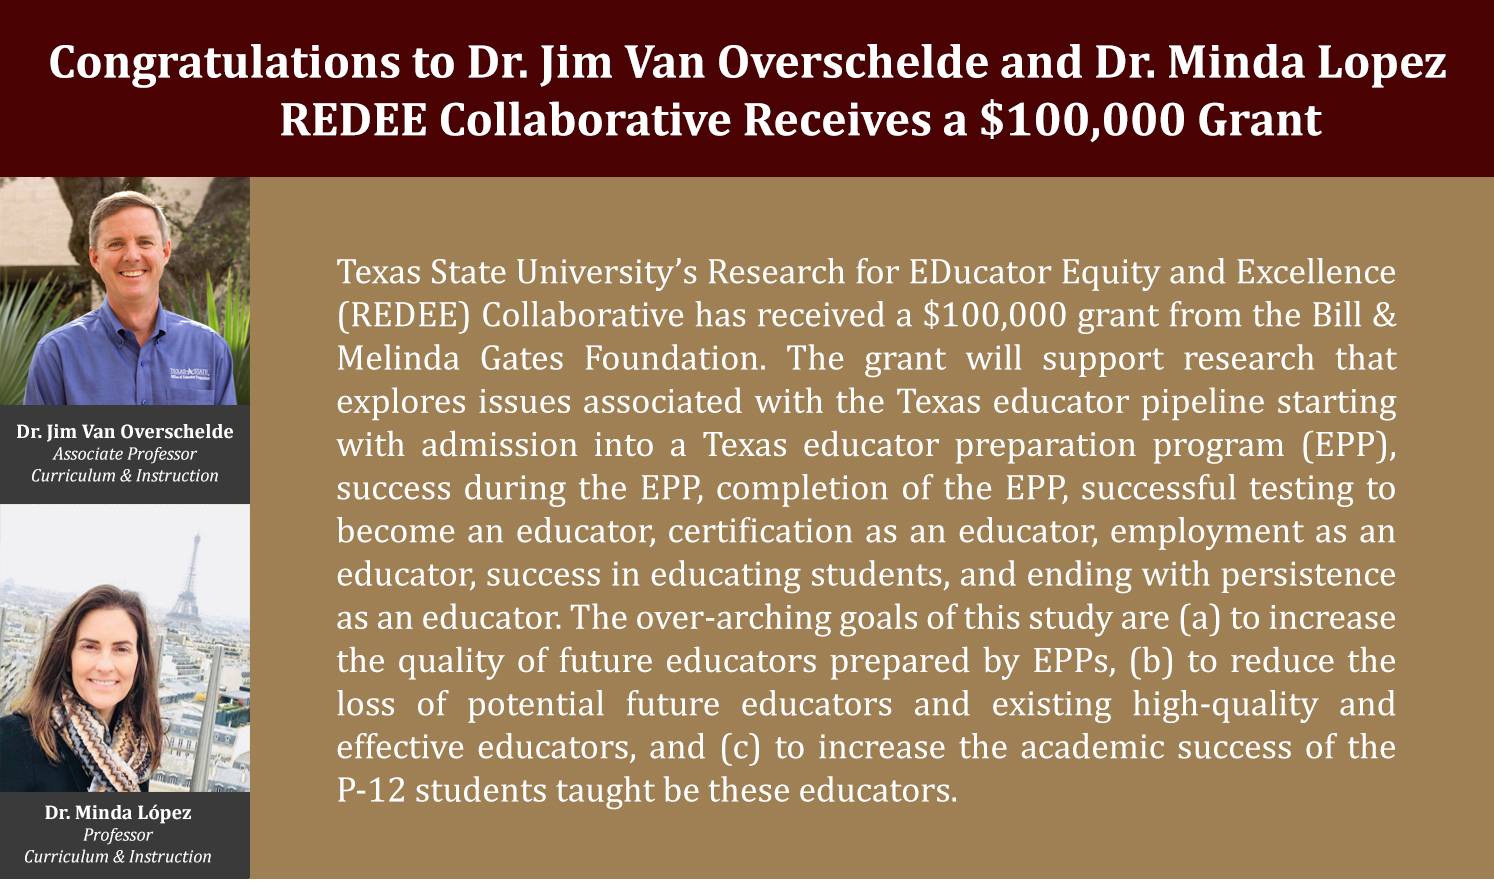 Texas State University’s Research for EDucator Equity and Excellence (REDEE) Collaborative has received a $100,000 grant from the Bill & Melinda Gates Foundation. The grant will support research that explores issues associated with the Texas educator pipeline starting with admission into a Texas educator preparation program (EPP), success during the EPP, completion of the EPP, successful testing to become an educator, certification as an educator, employment as an educator, success in educating students, and ending with persistence as an educator. The over-arching goals of this study are (a) to increase the quality of future educators prepared by EPPs, (b) to reduce the loss of potential future educators and existing high-quality and effective educators, and (c) to increase the academic success of the P-12 students taught be these educators.